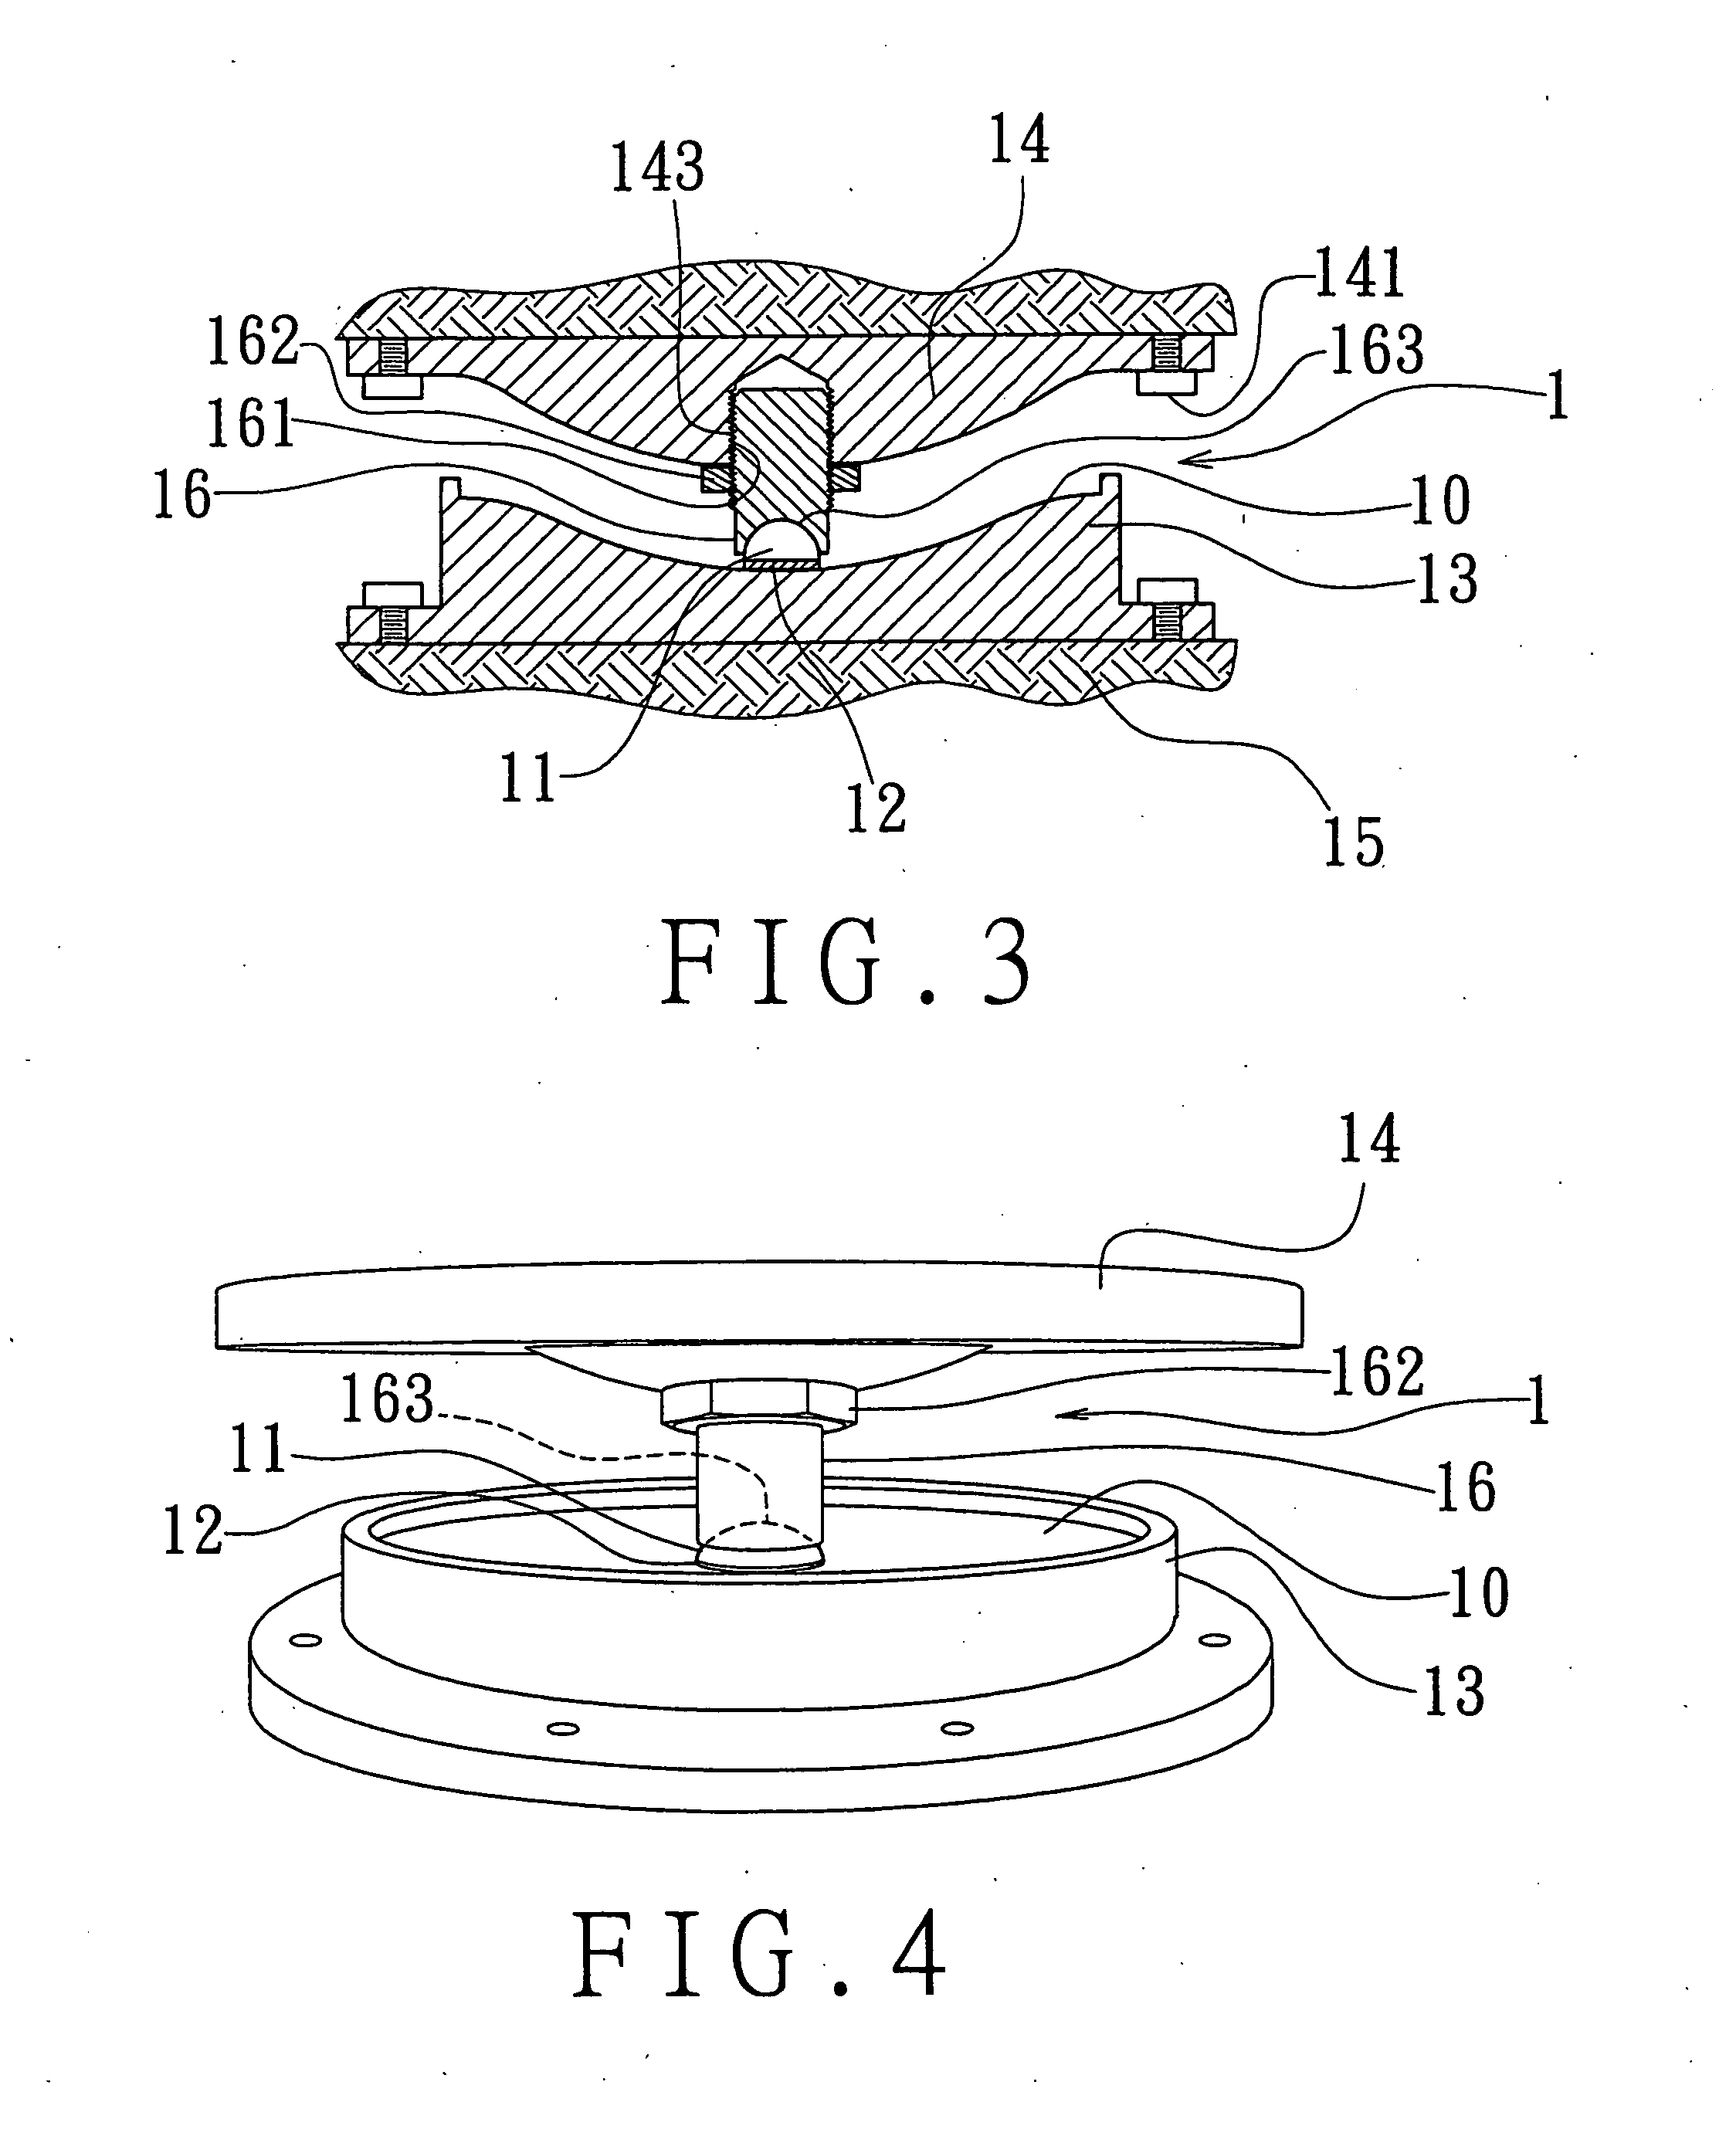 Seismic isolator with variable curvature